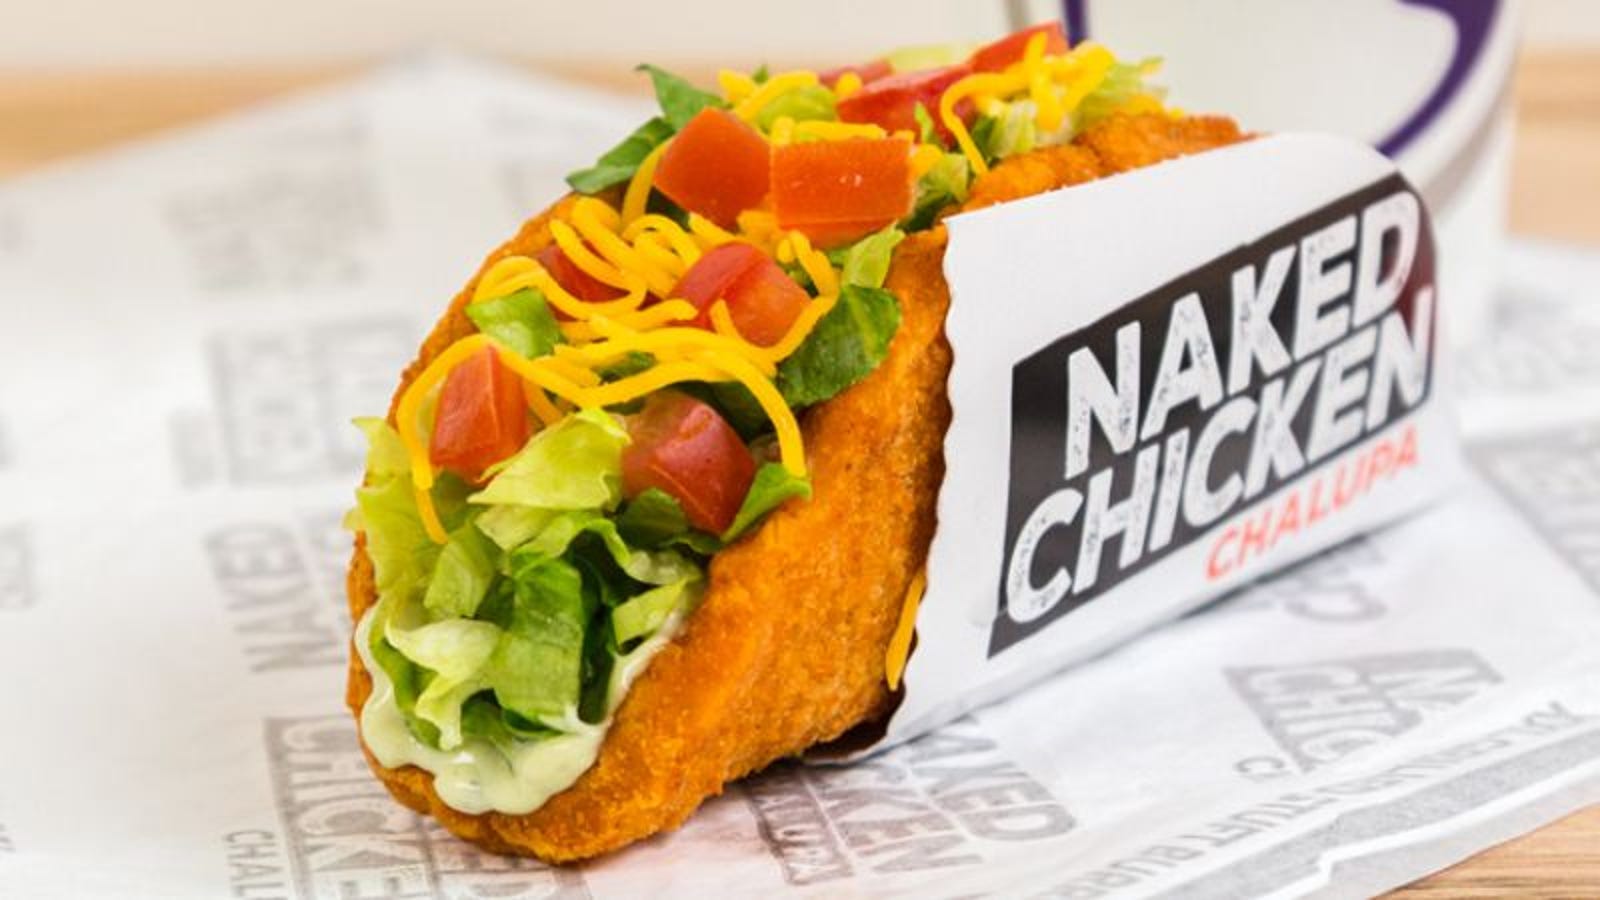 Taco Bell brings back the Naked Chicken Chalupa, adds a.